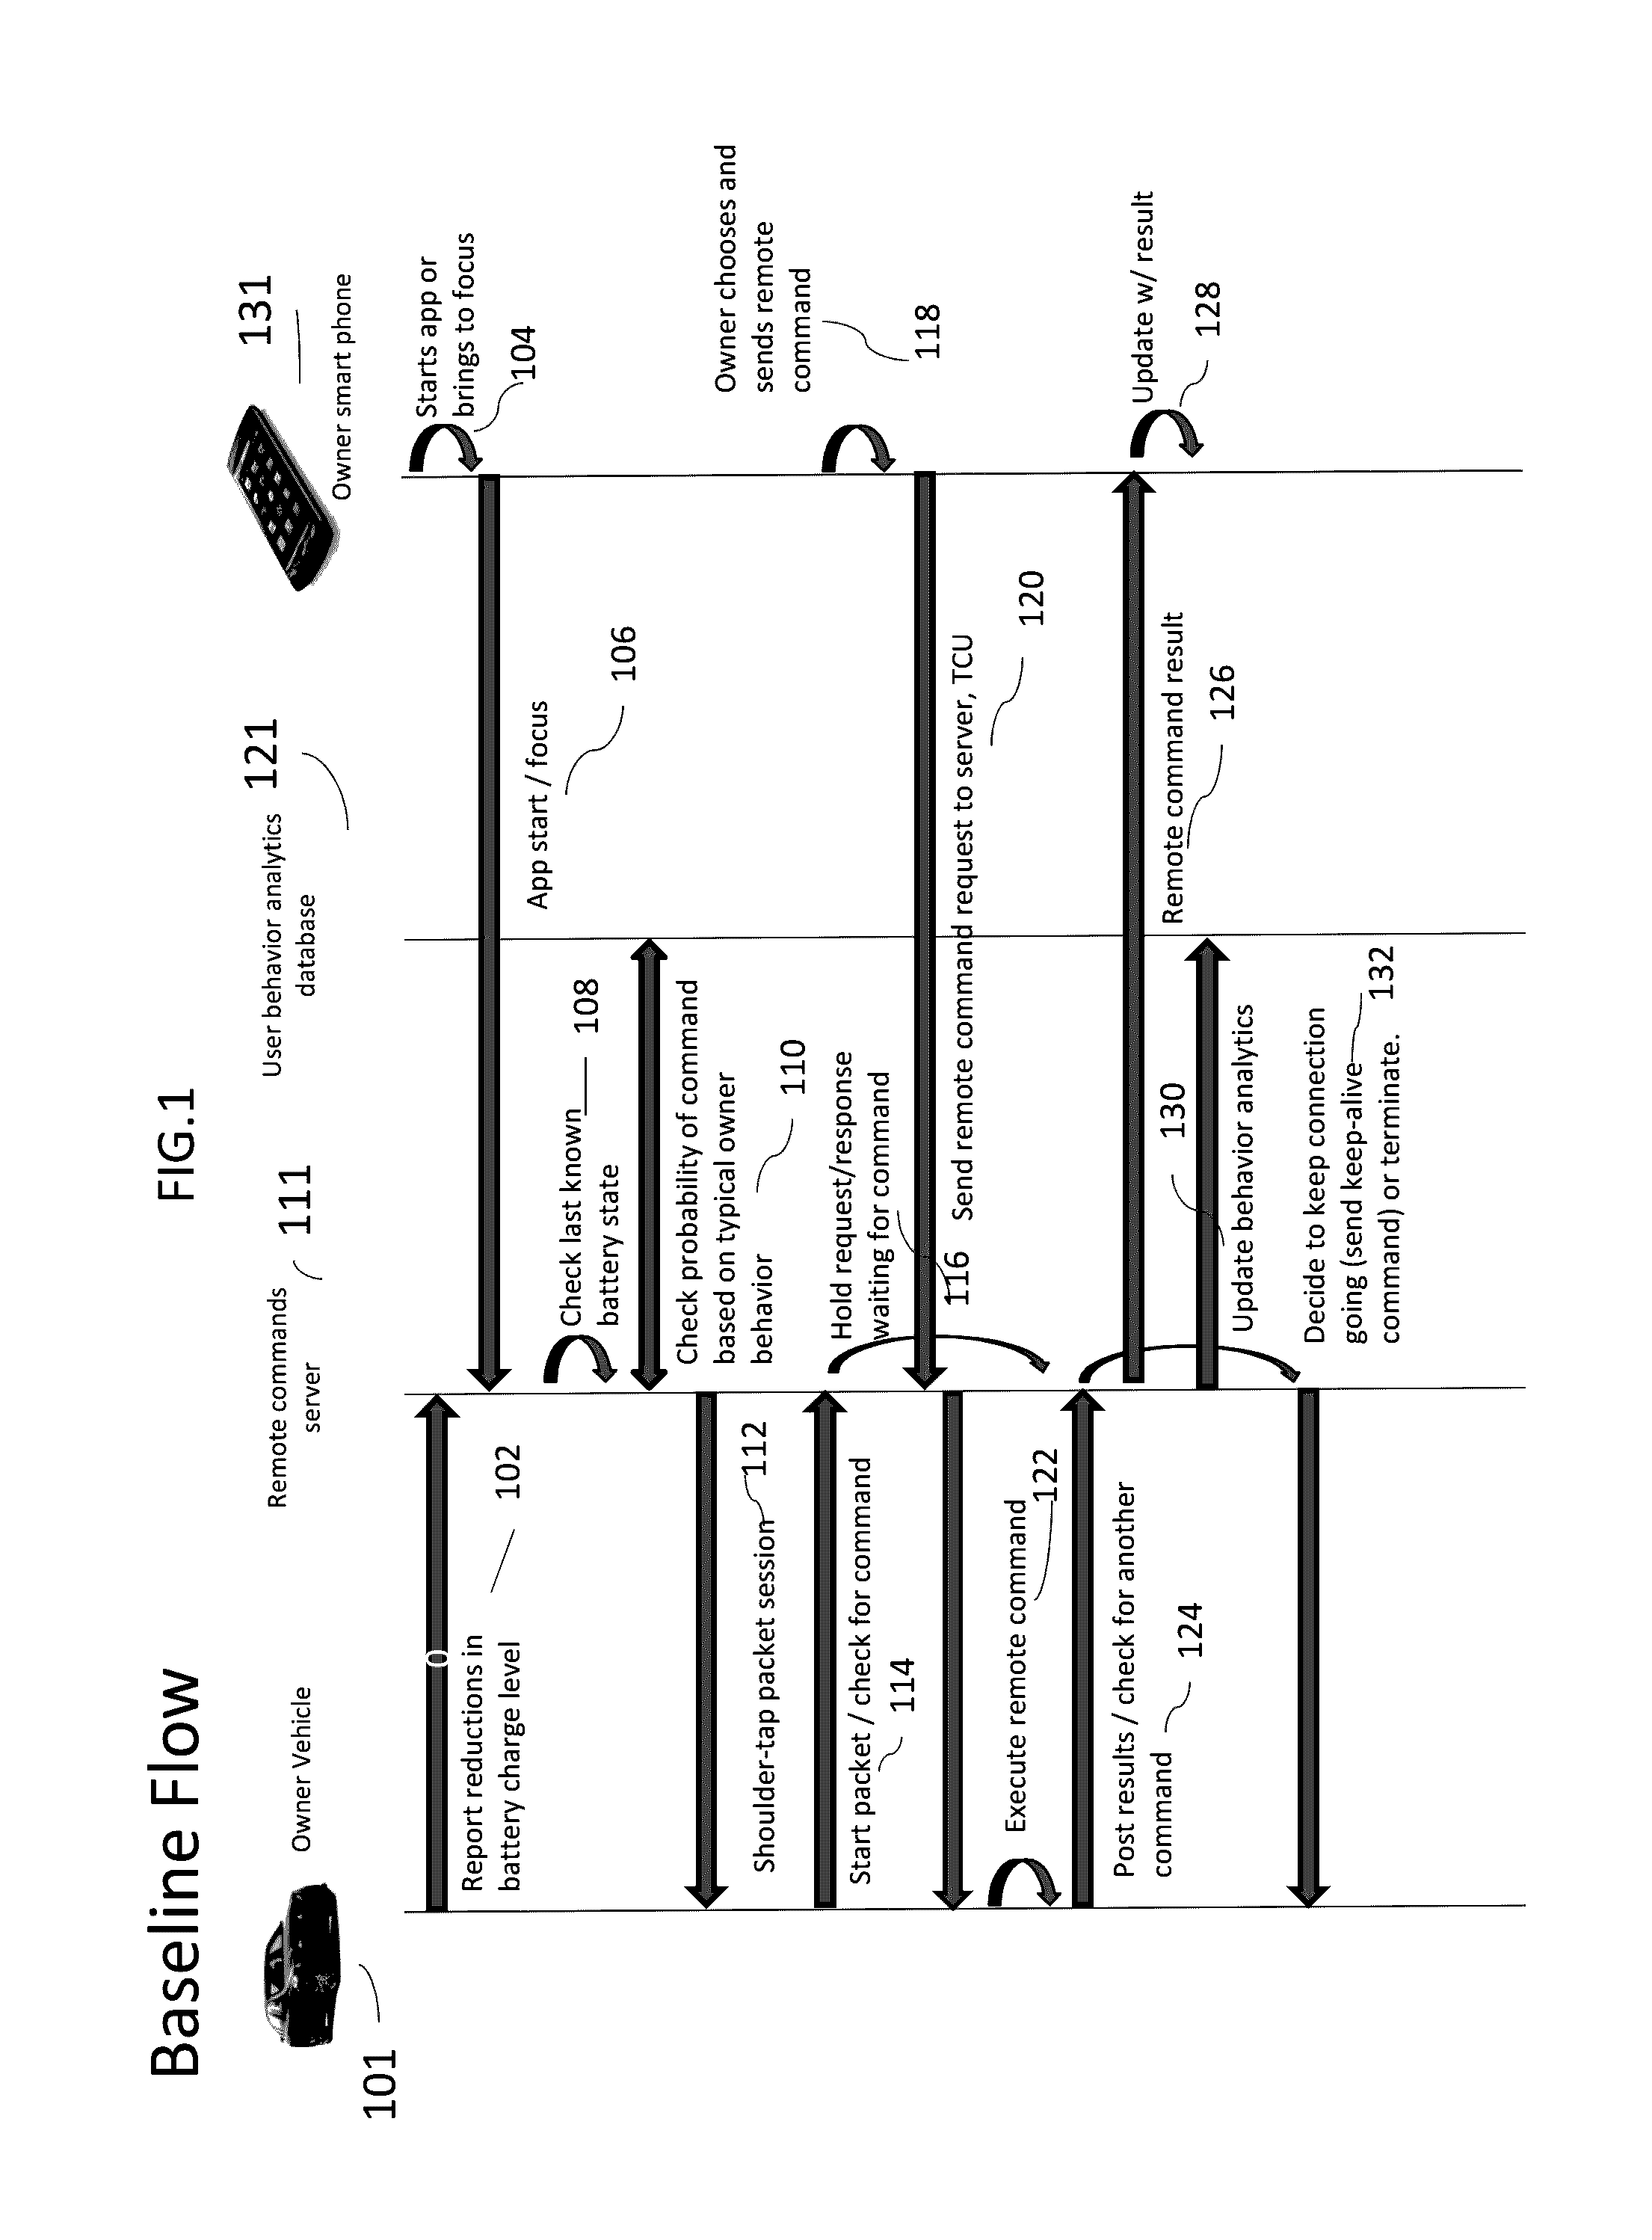 Method and system for optimizing execution of user commands in relation to power management